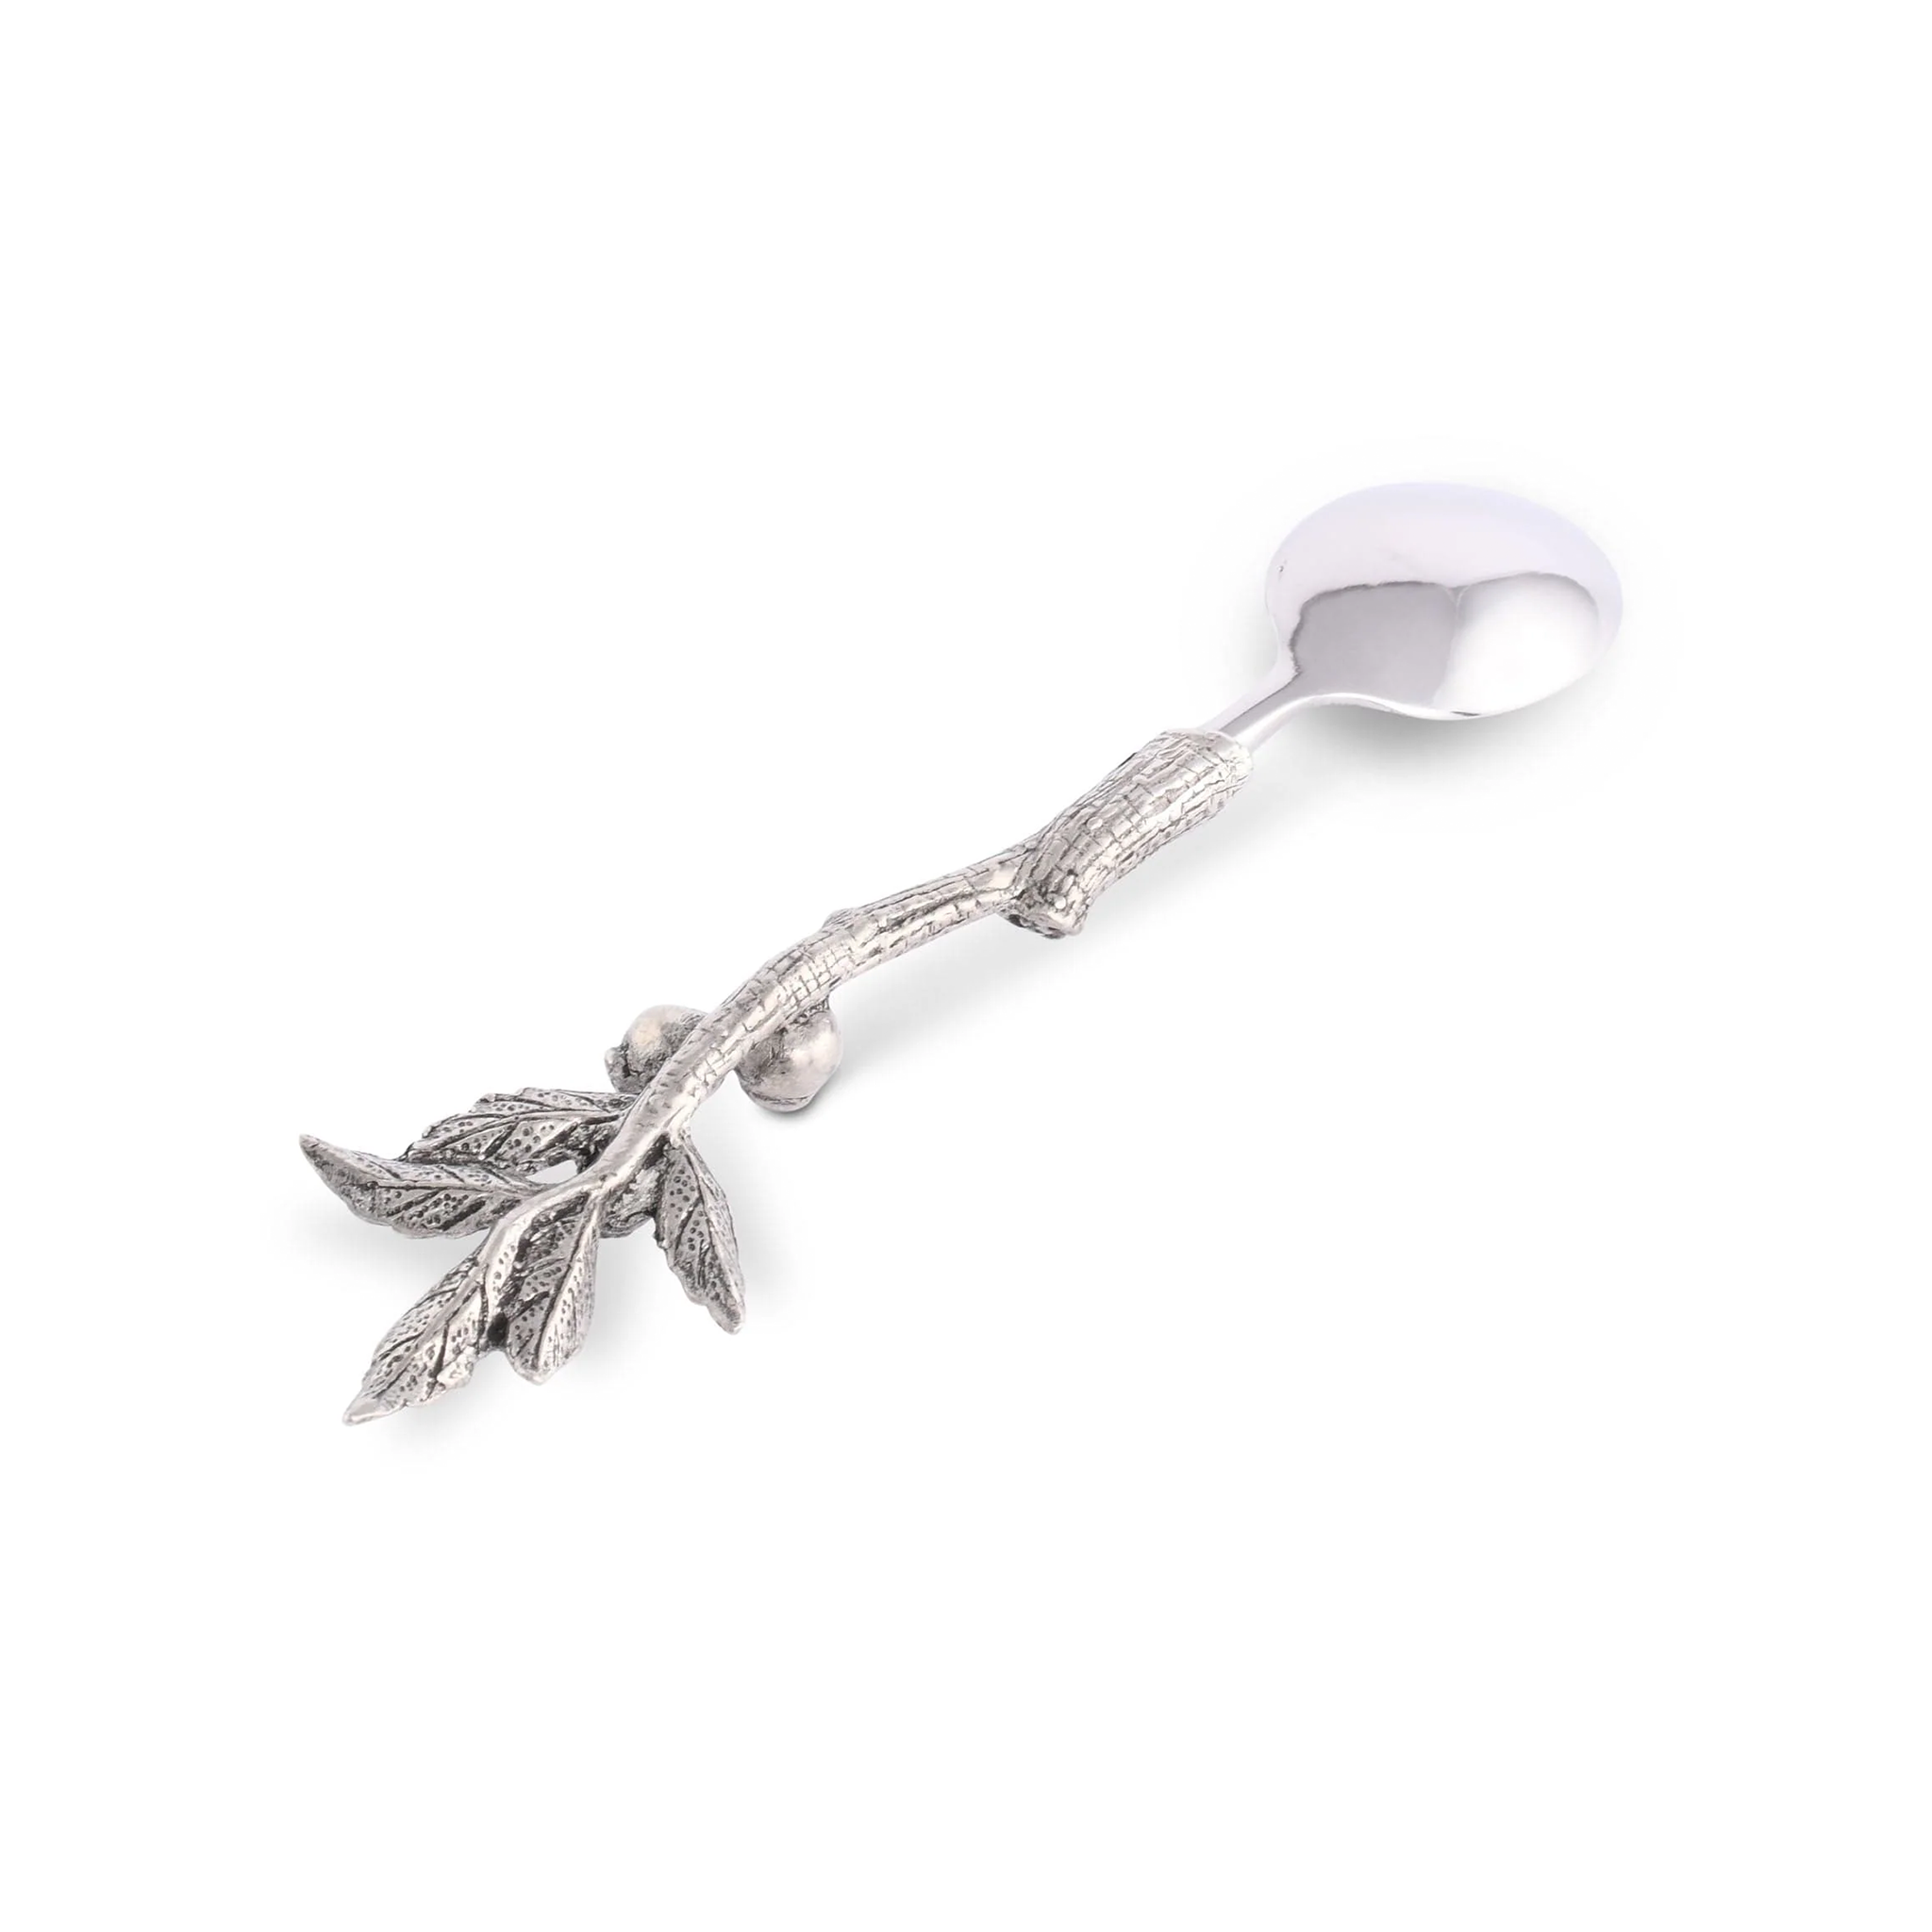 a spoon with a leaf design on it